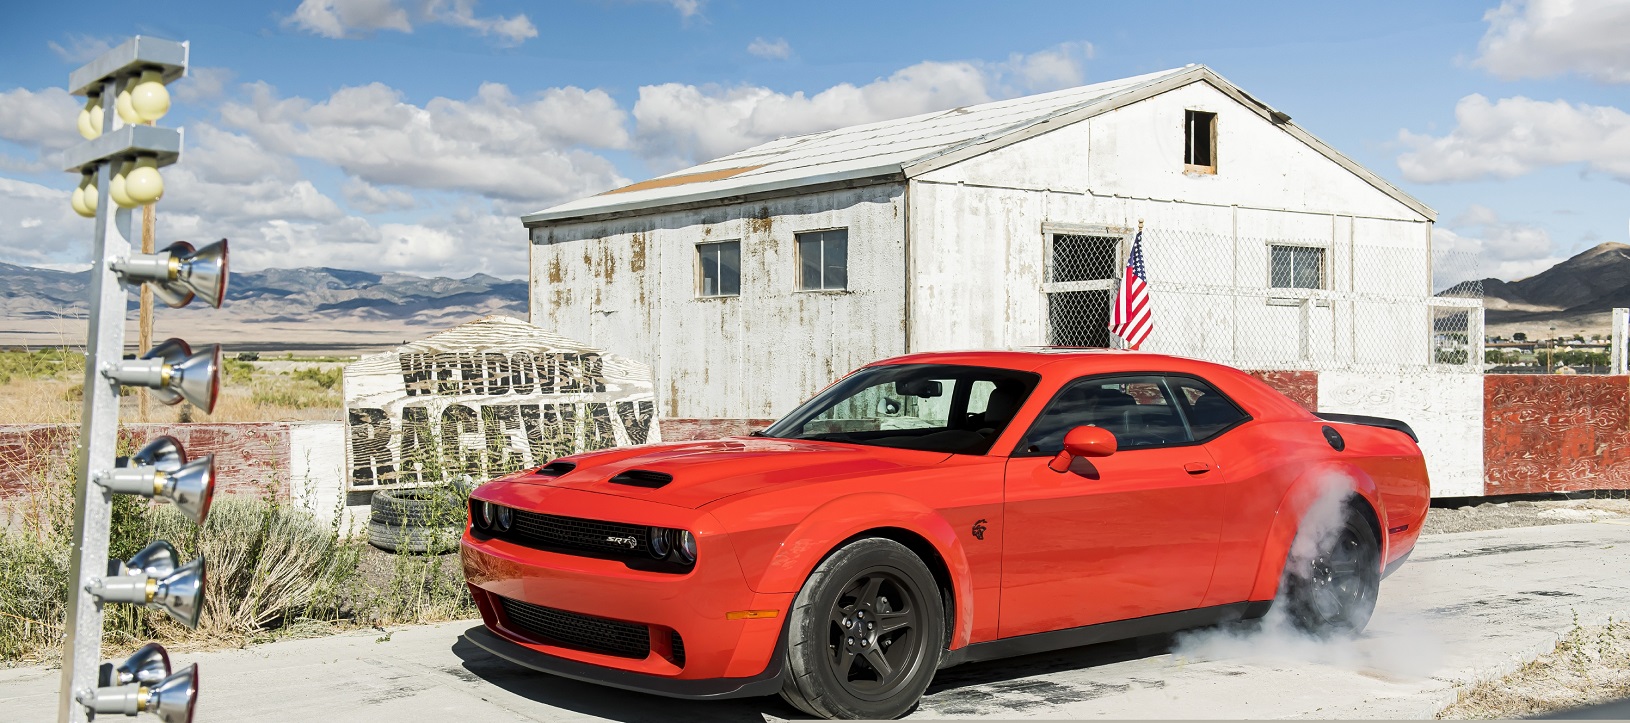 Drag Strip Ready: Dodge Announces New 2020 Challenger SRT<sup>®</sup> Super Stock Package Pricing